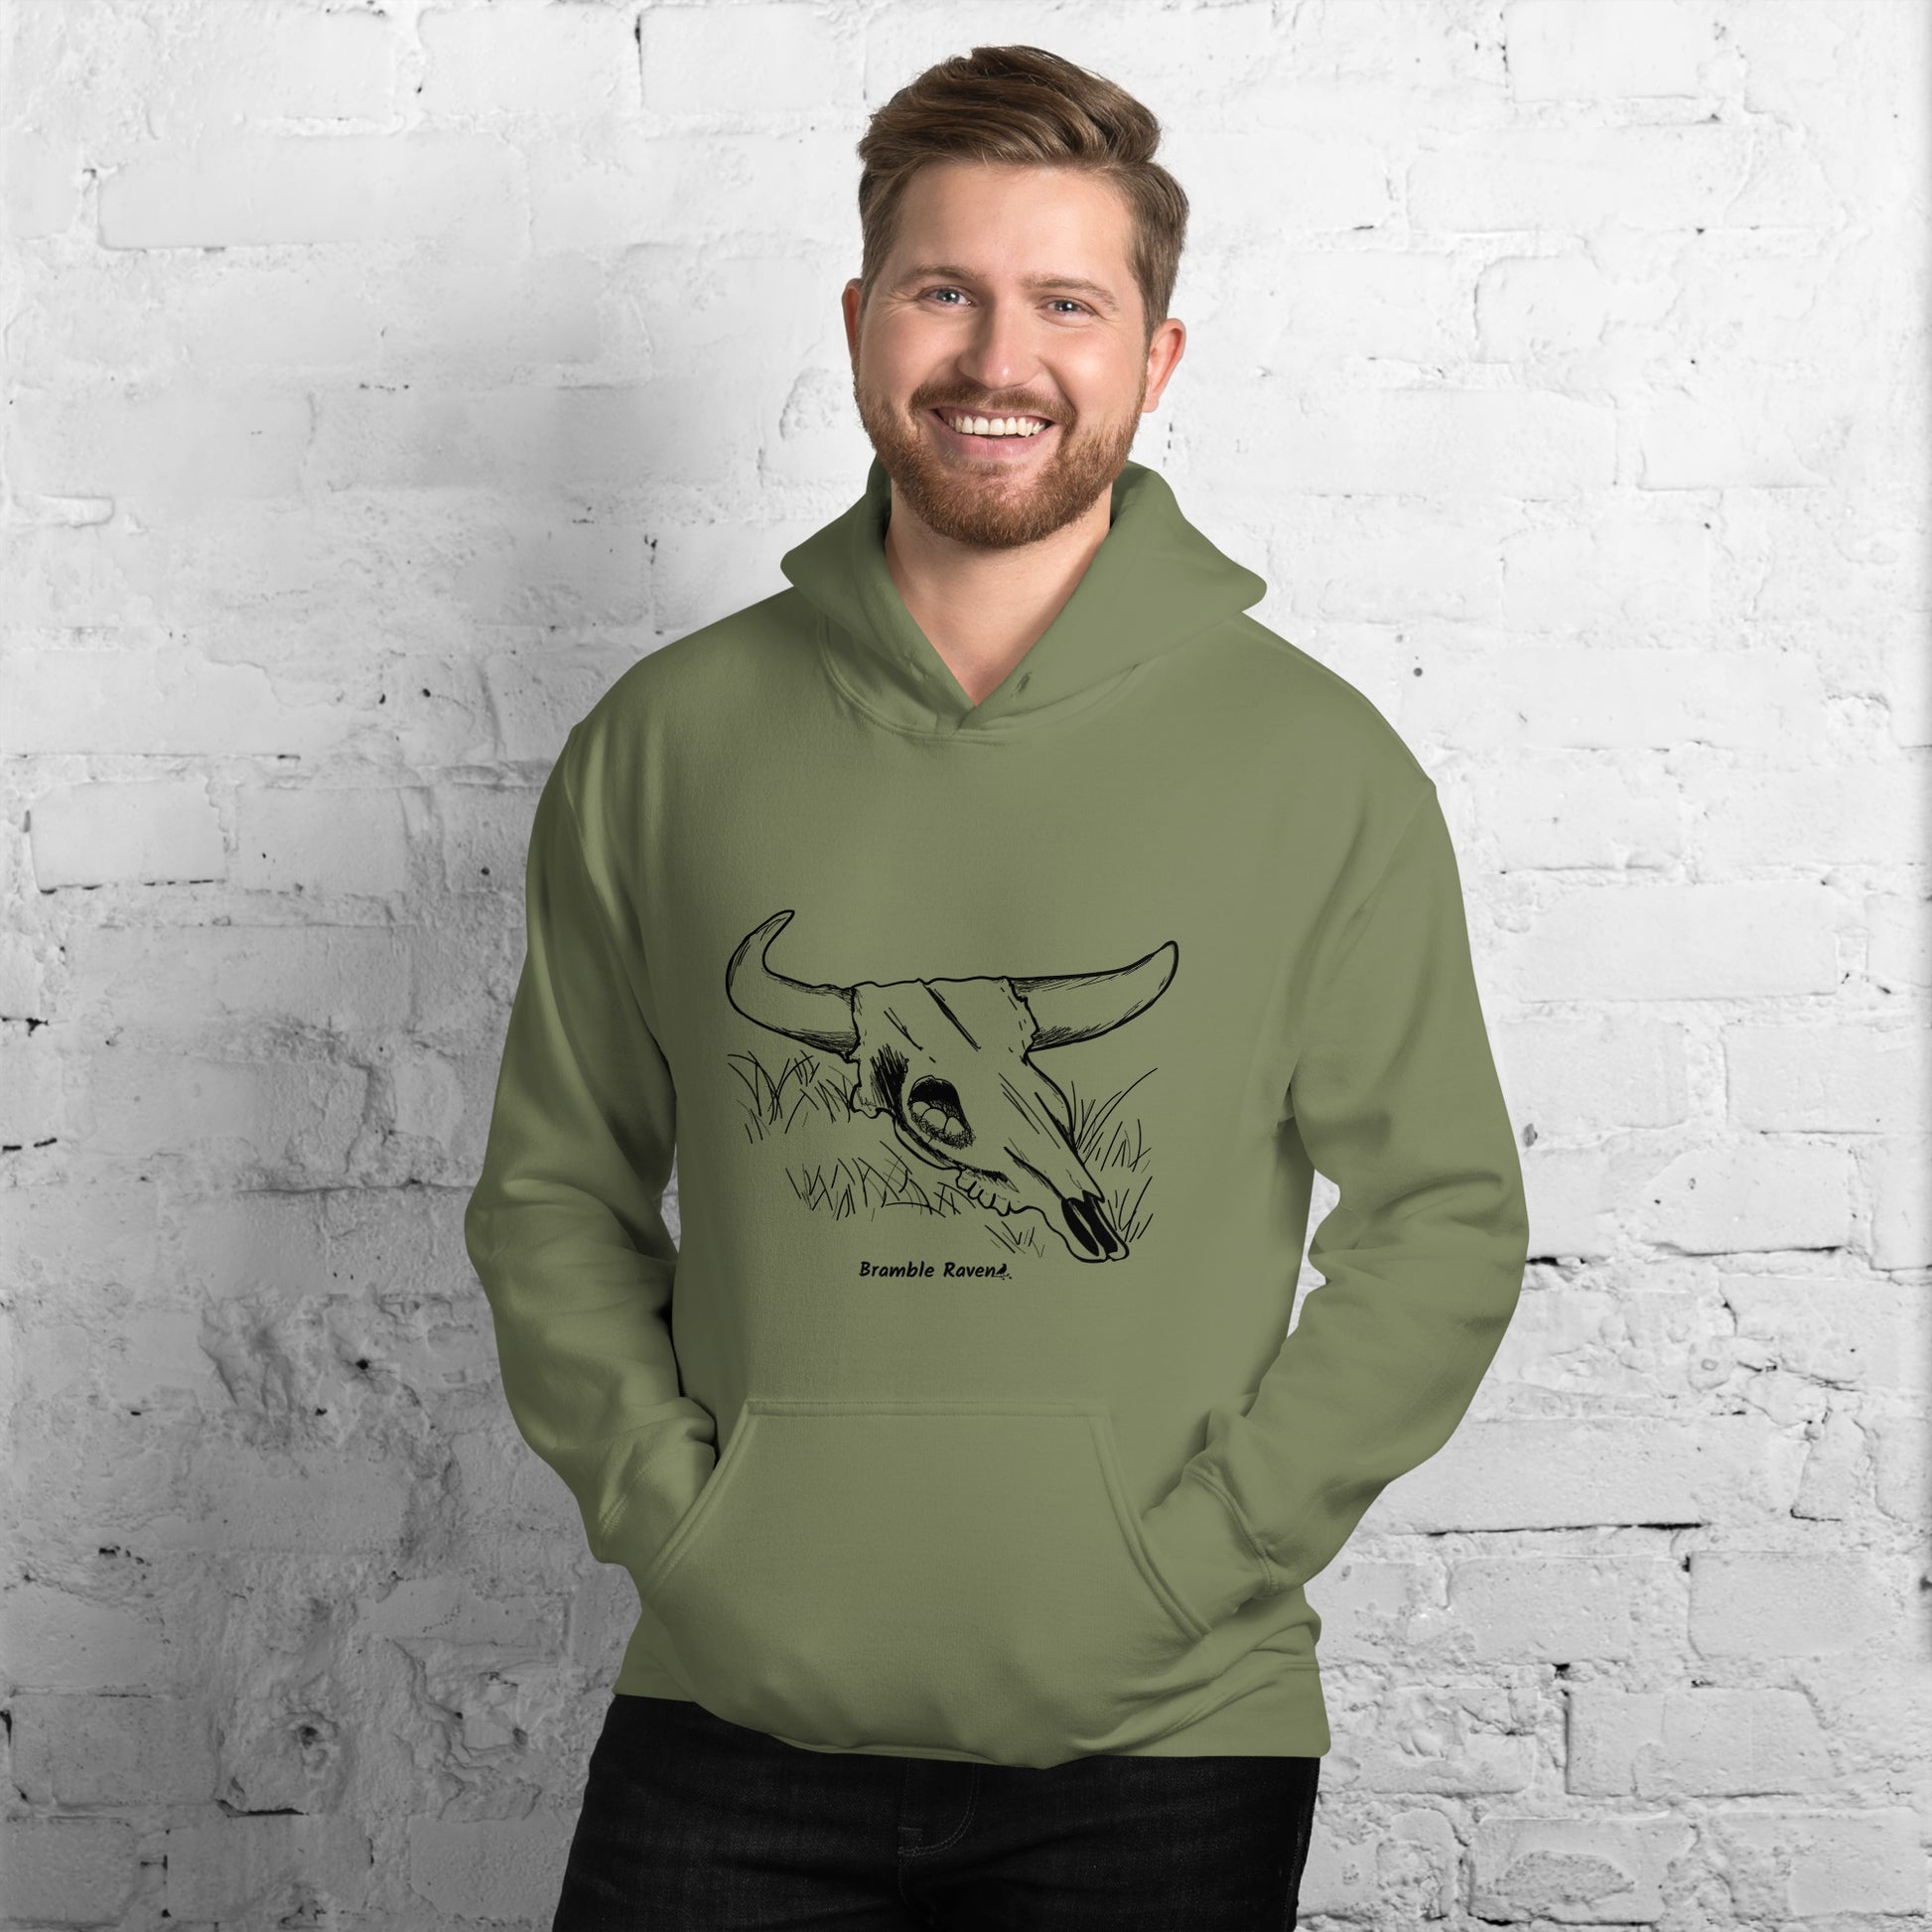 Military green colored unisex hoodie. Front has image of a cow skull cradling a bird nest. Features double-lined hood and front pouch pocket. Shown on male model in front of brick wall.